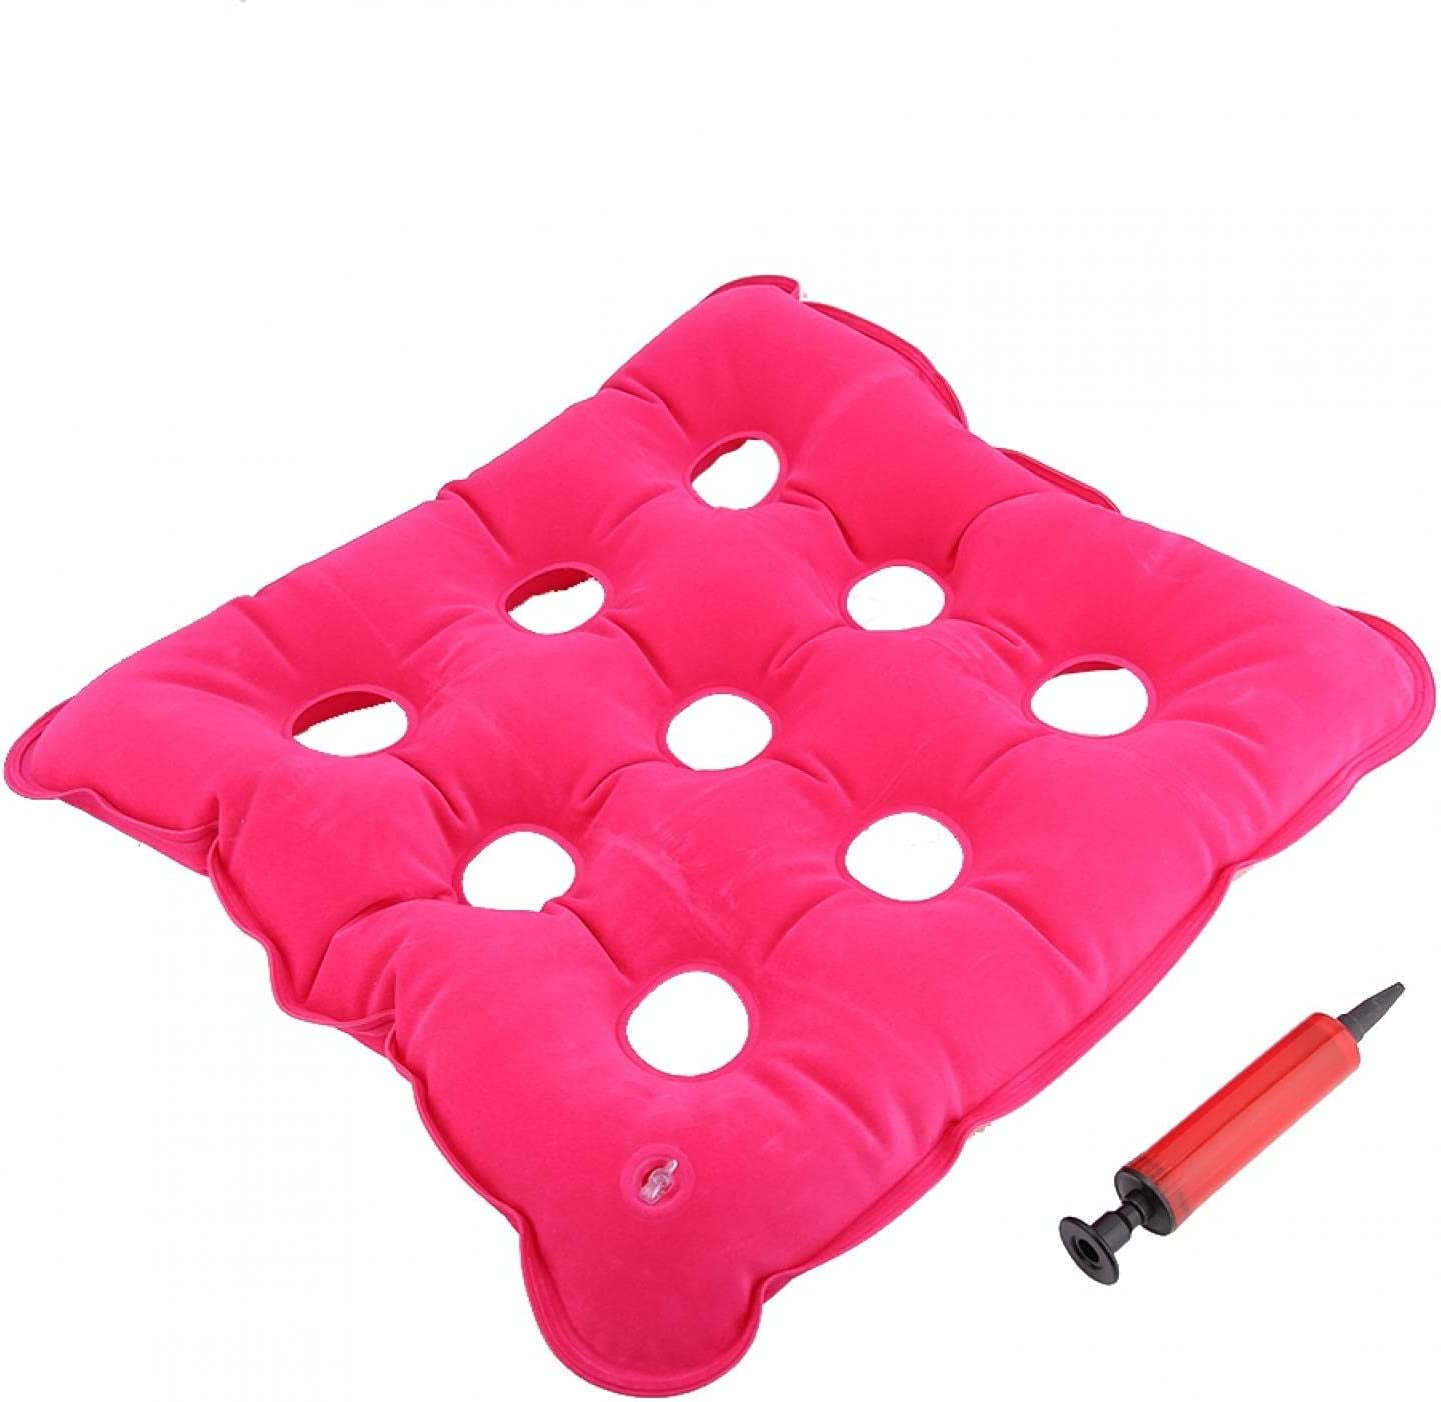 AplusBuy Air Inflatable Seat Cushion with Pump Seat Pad Anti Bedsore Pain Relief Wheelchair Home